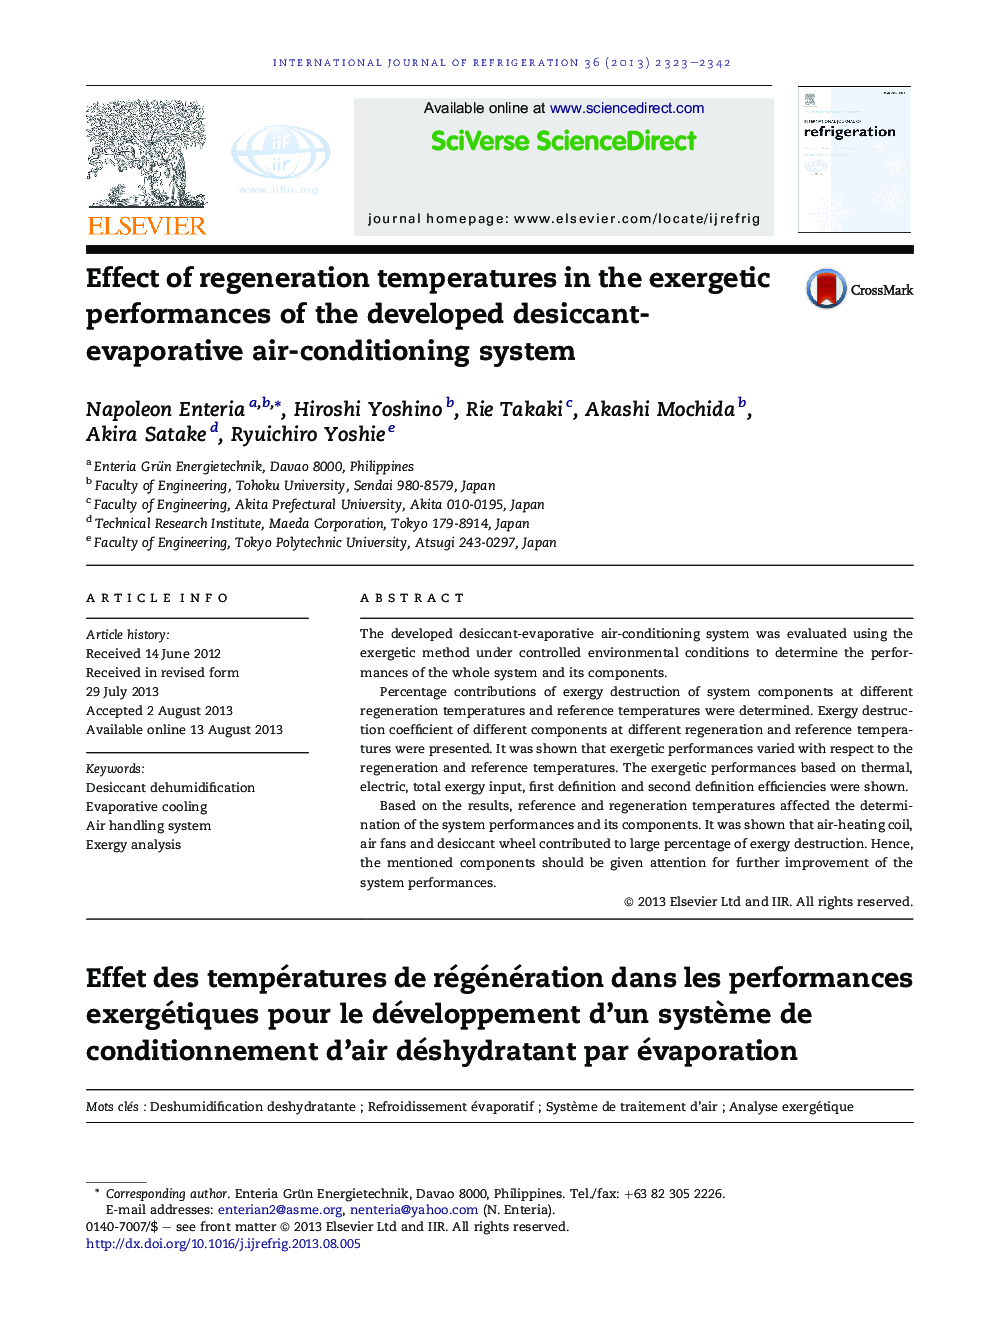 Effect of regeneration temperatures in the exergetic performances of the developed desiccant-evaporative air-conditioning system